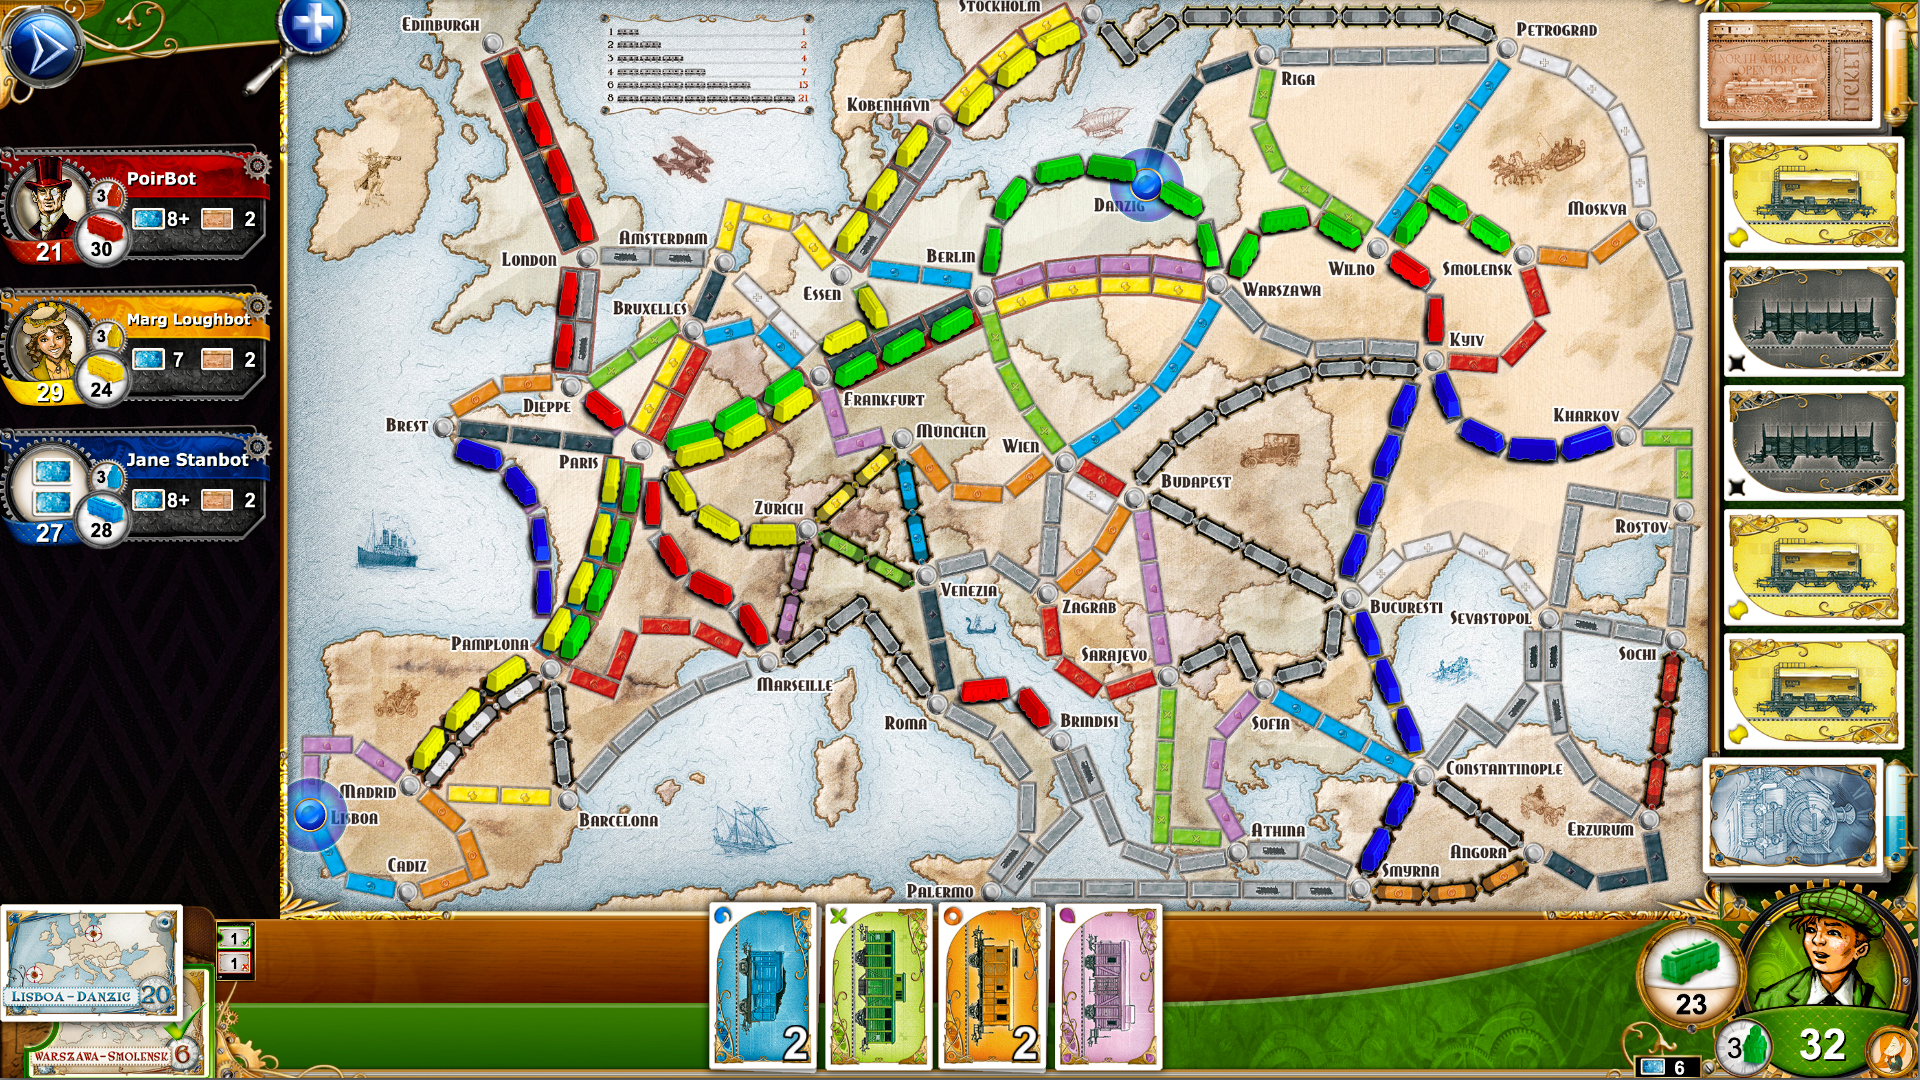 a ticket to ride game